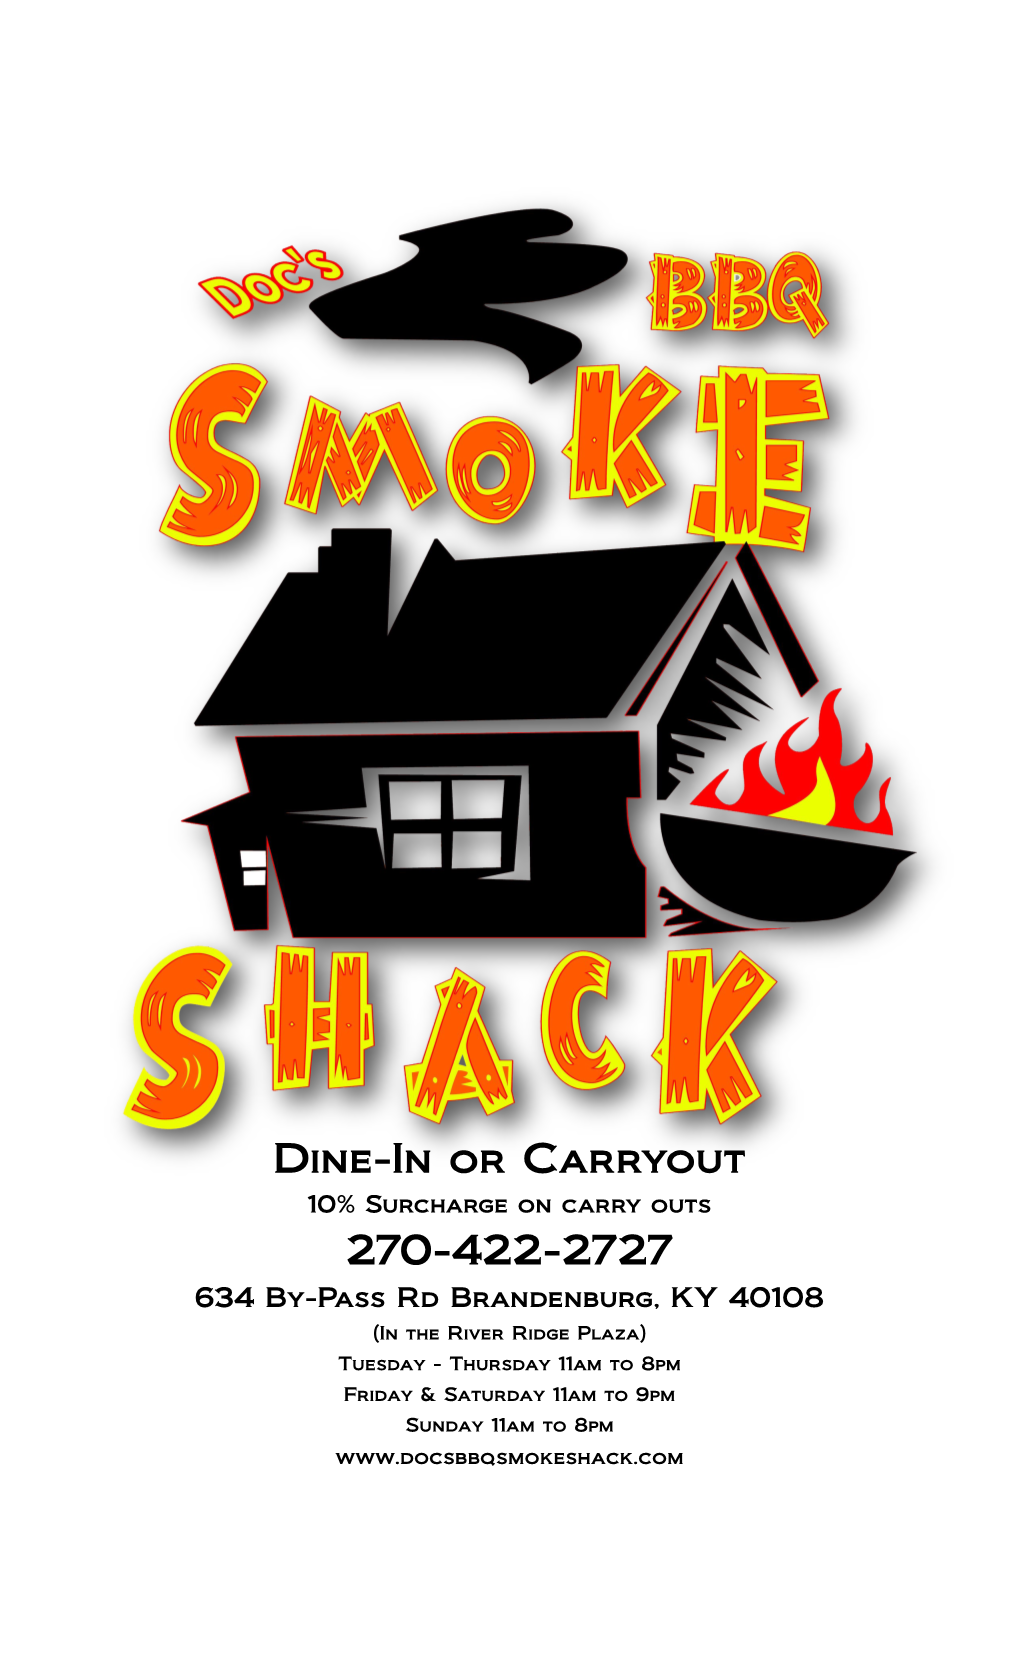 Dine-In Or Carryout 270-422-2727